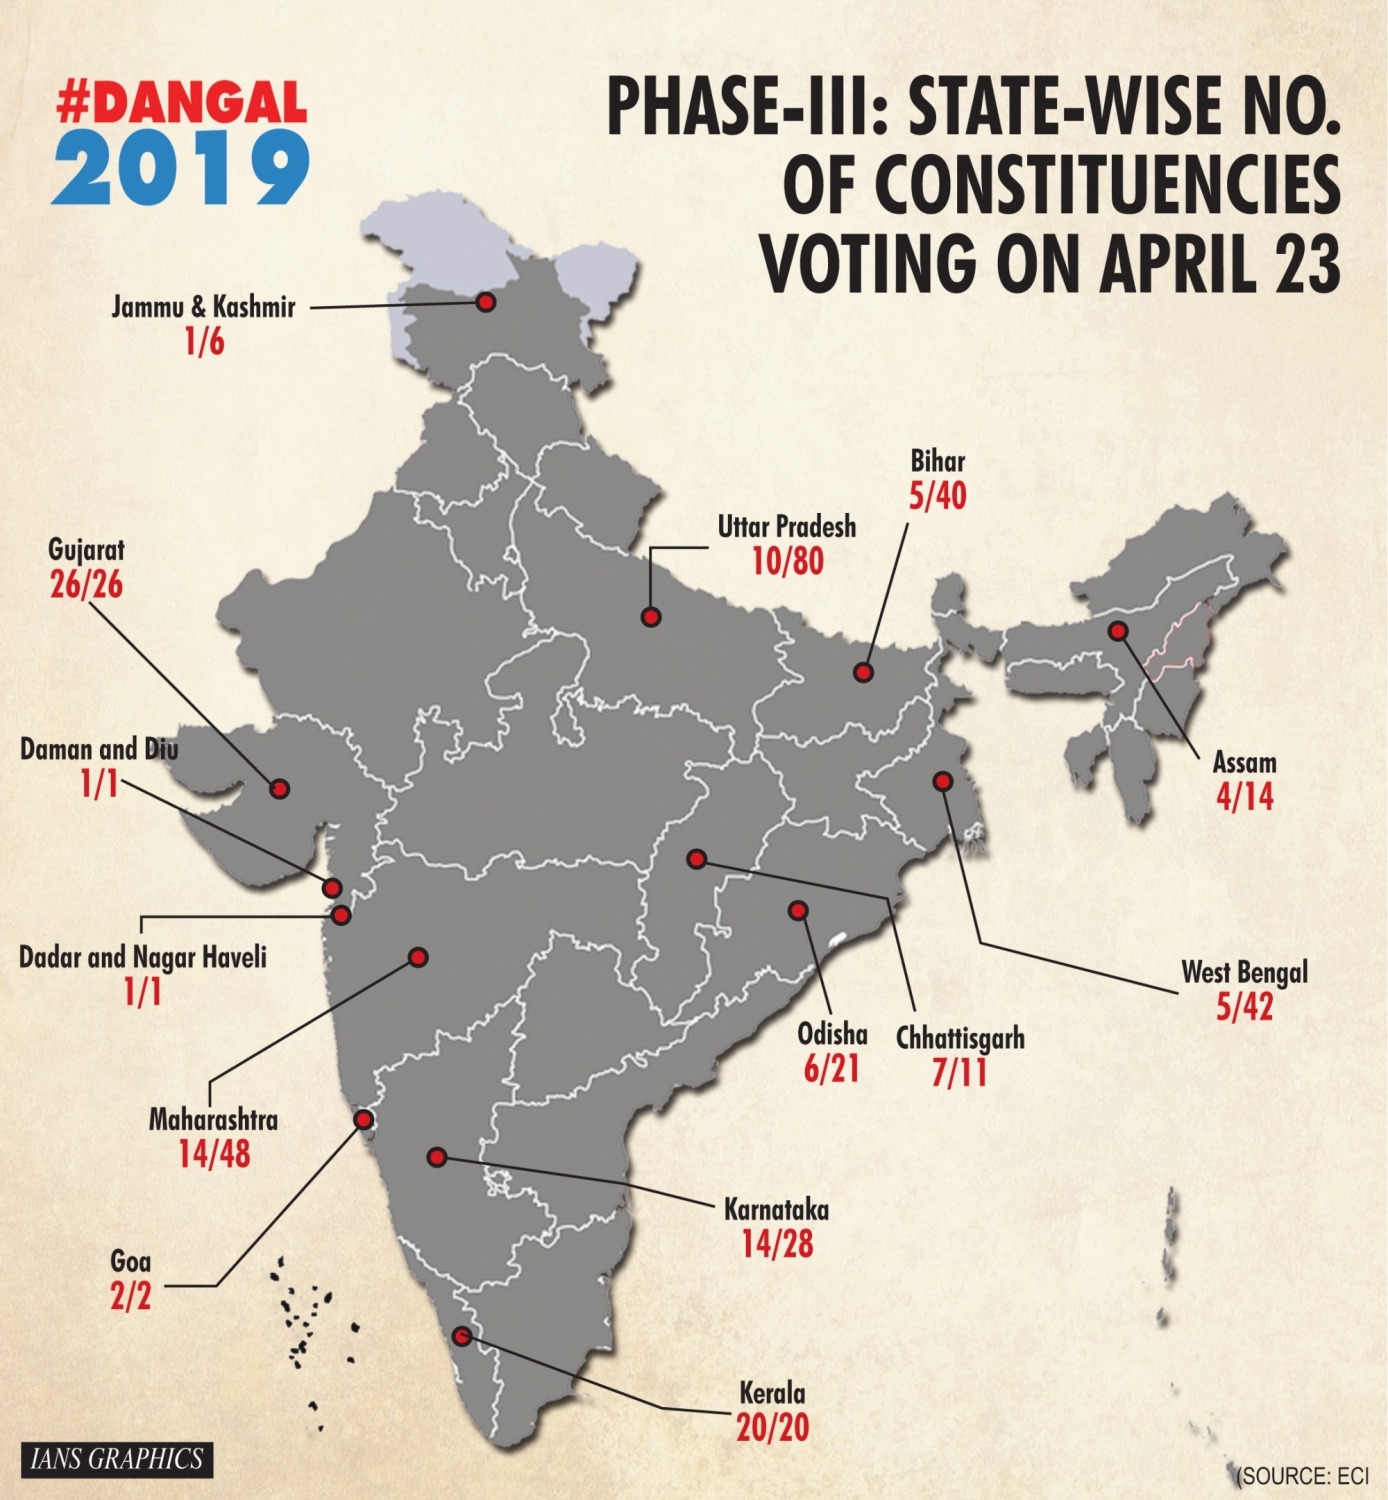 Elections 2019 Third Phase Voting On Tuesday For 117 Seats Across 15